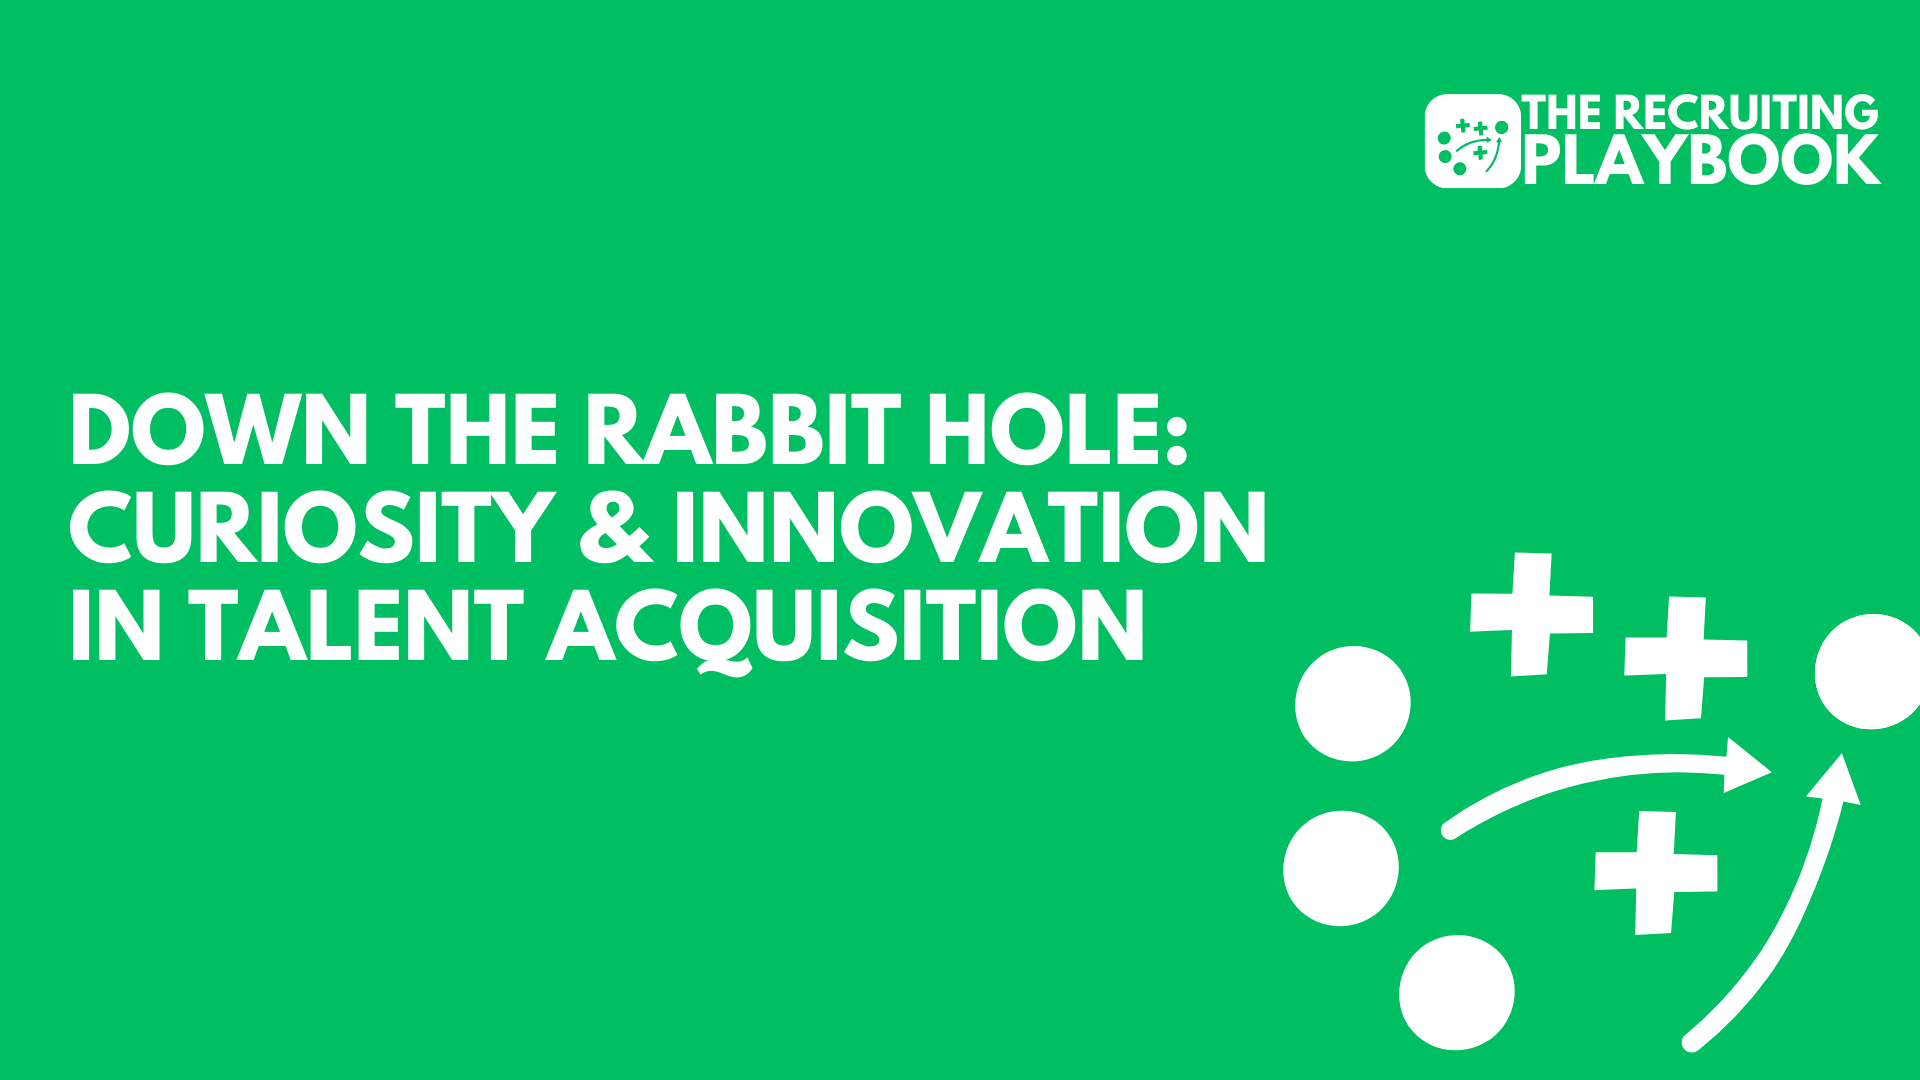 Down the rabbit hole: Curiosity & Innovation in Talent Acquisition